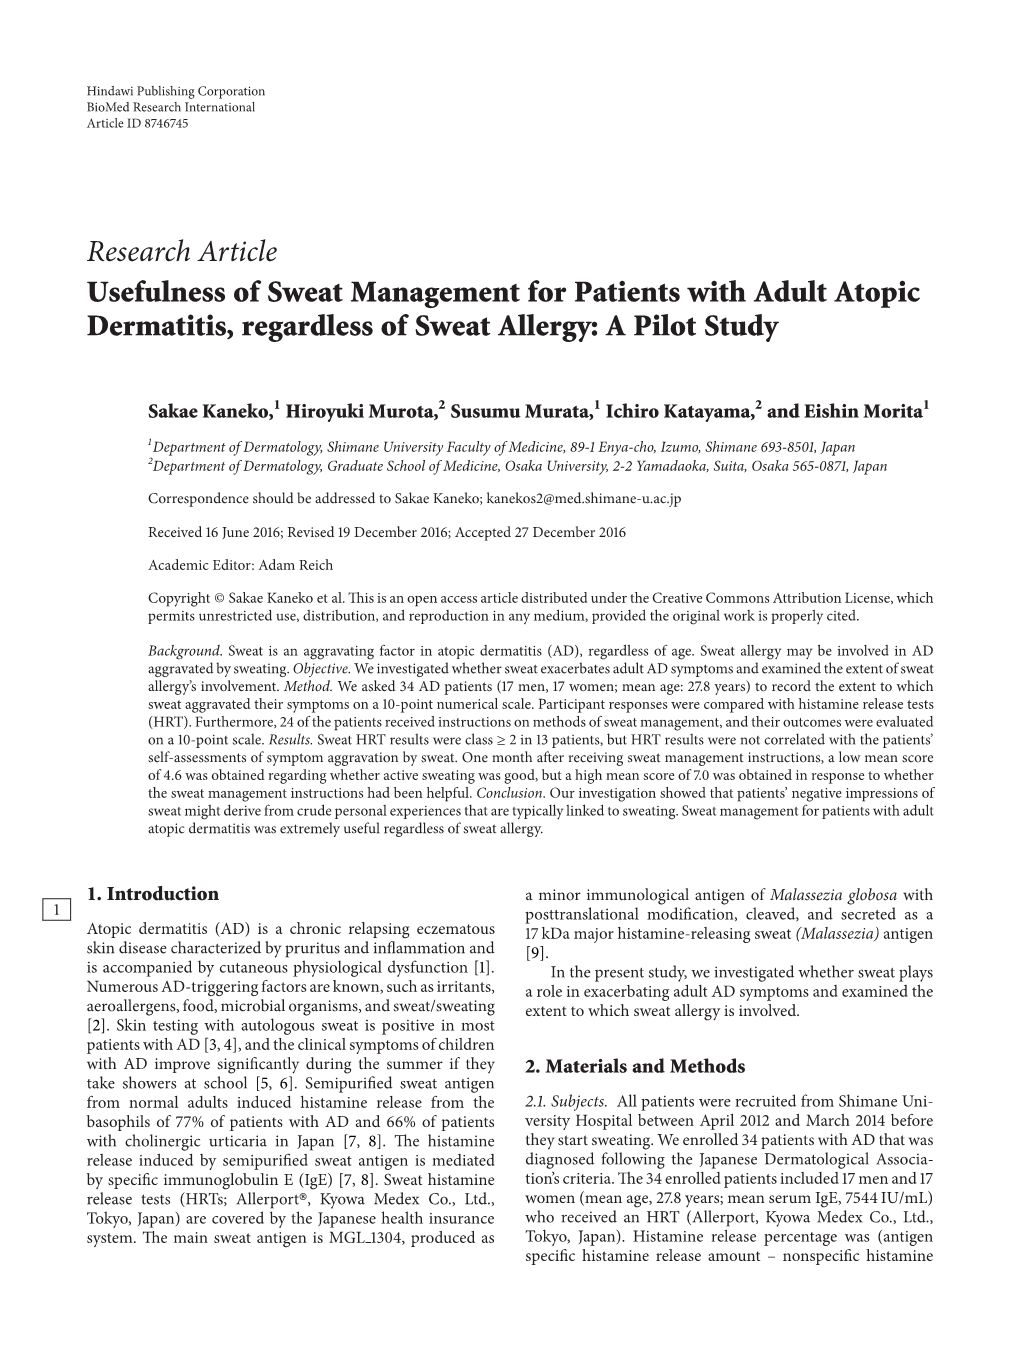 Research Article Usefulness of Sweat Management for Patients with Adult Atopic Dermatitis, Regardless of Sweat Allergy: a Pilot Study